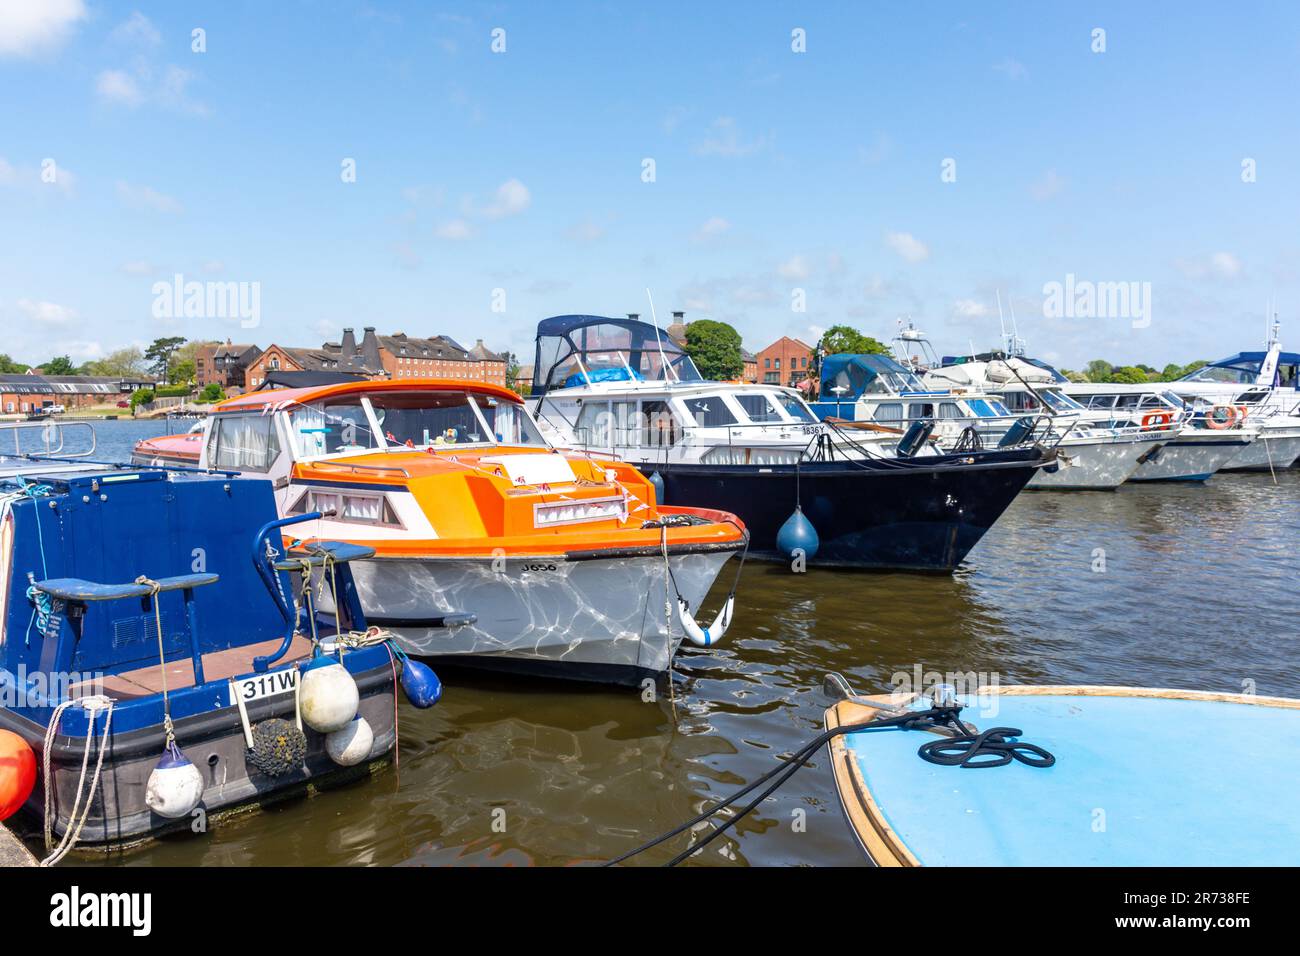 Boats moored in Oulton Broad Lake, Oulton Broad, Lowestoft, Suffolk, England, United Kingdom Stock Photo